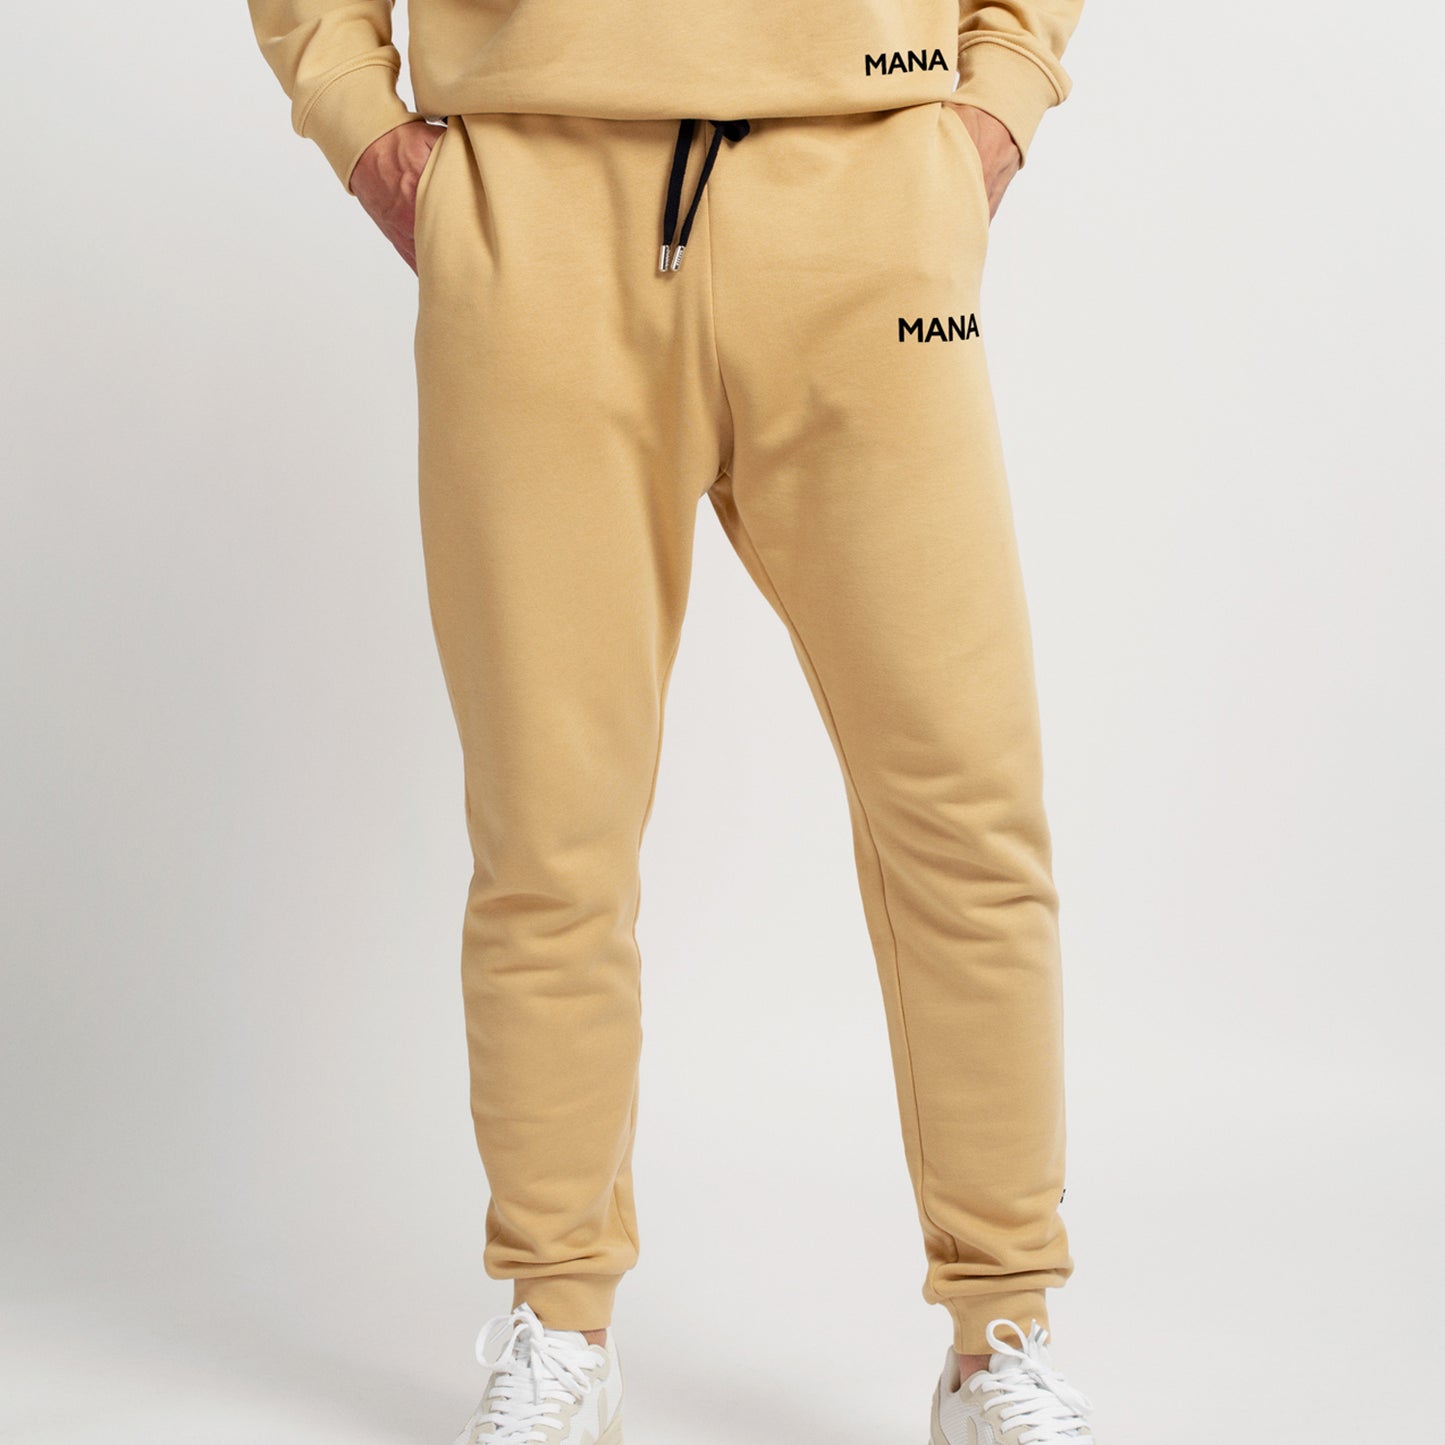 Rivero ⚡️Sand  Cool outfits for men, Mens joggers outfit